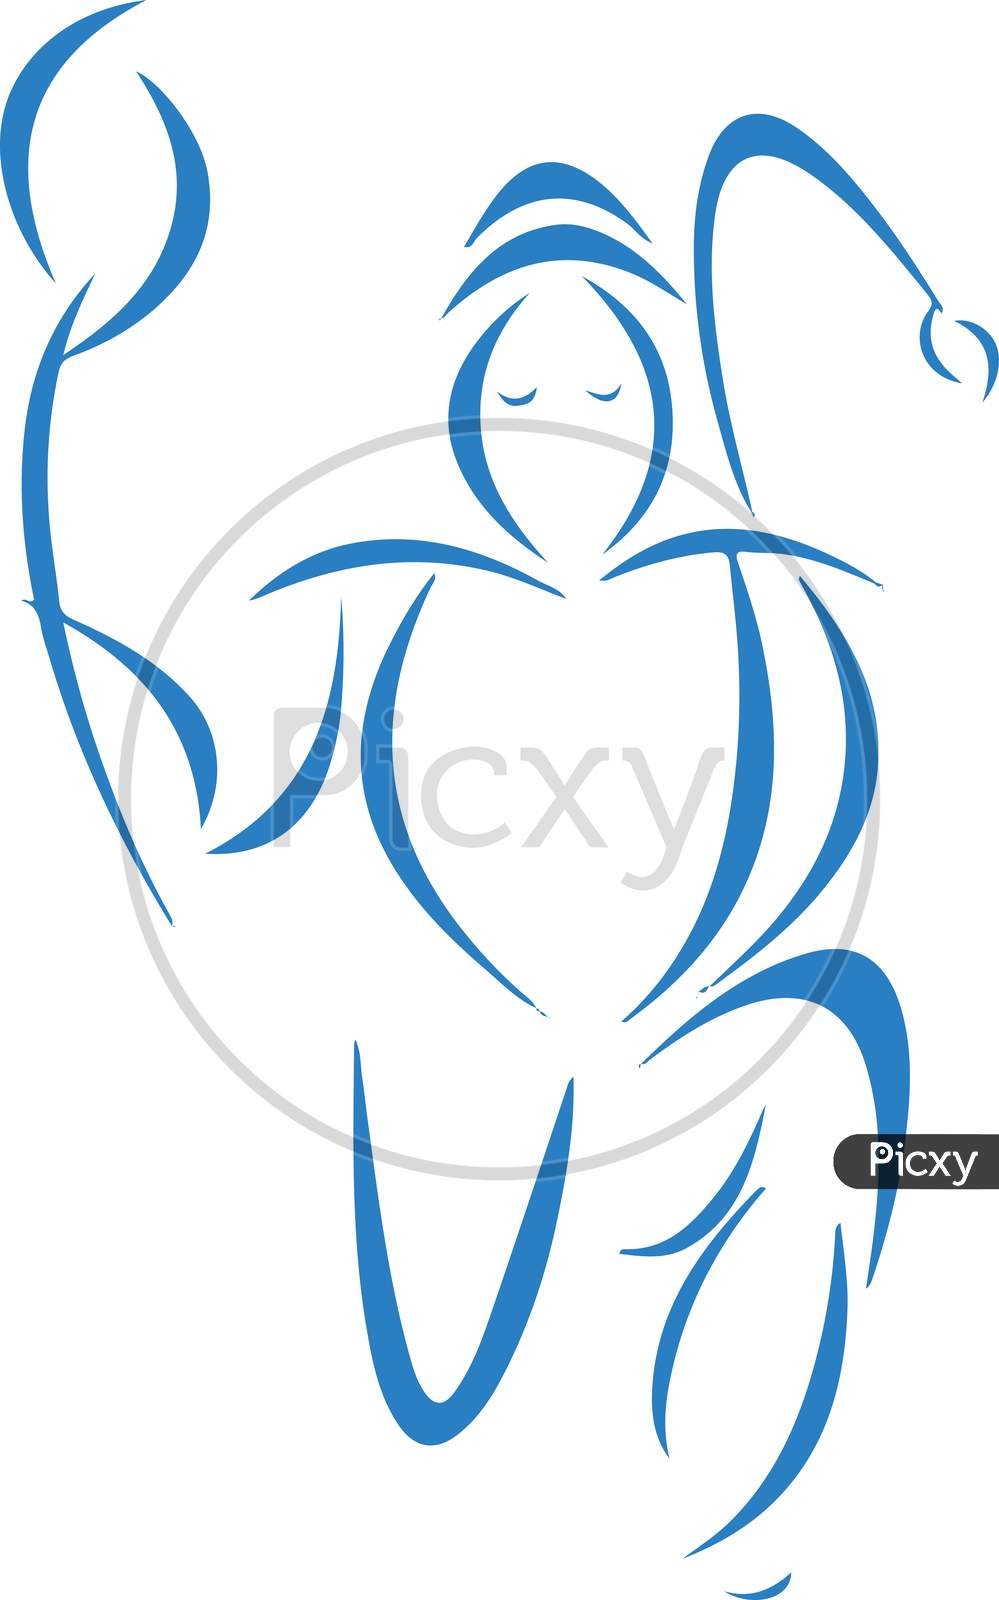 Drawing Or Sketch Of Lord Hanuman Or Maruti Abstract Sitting Pose Outline Editable Illustration